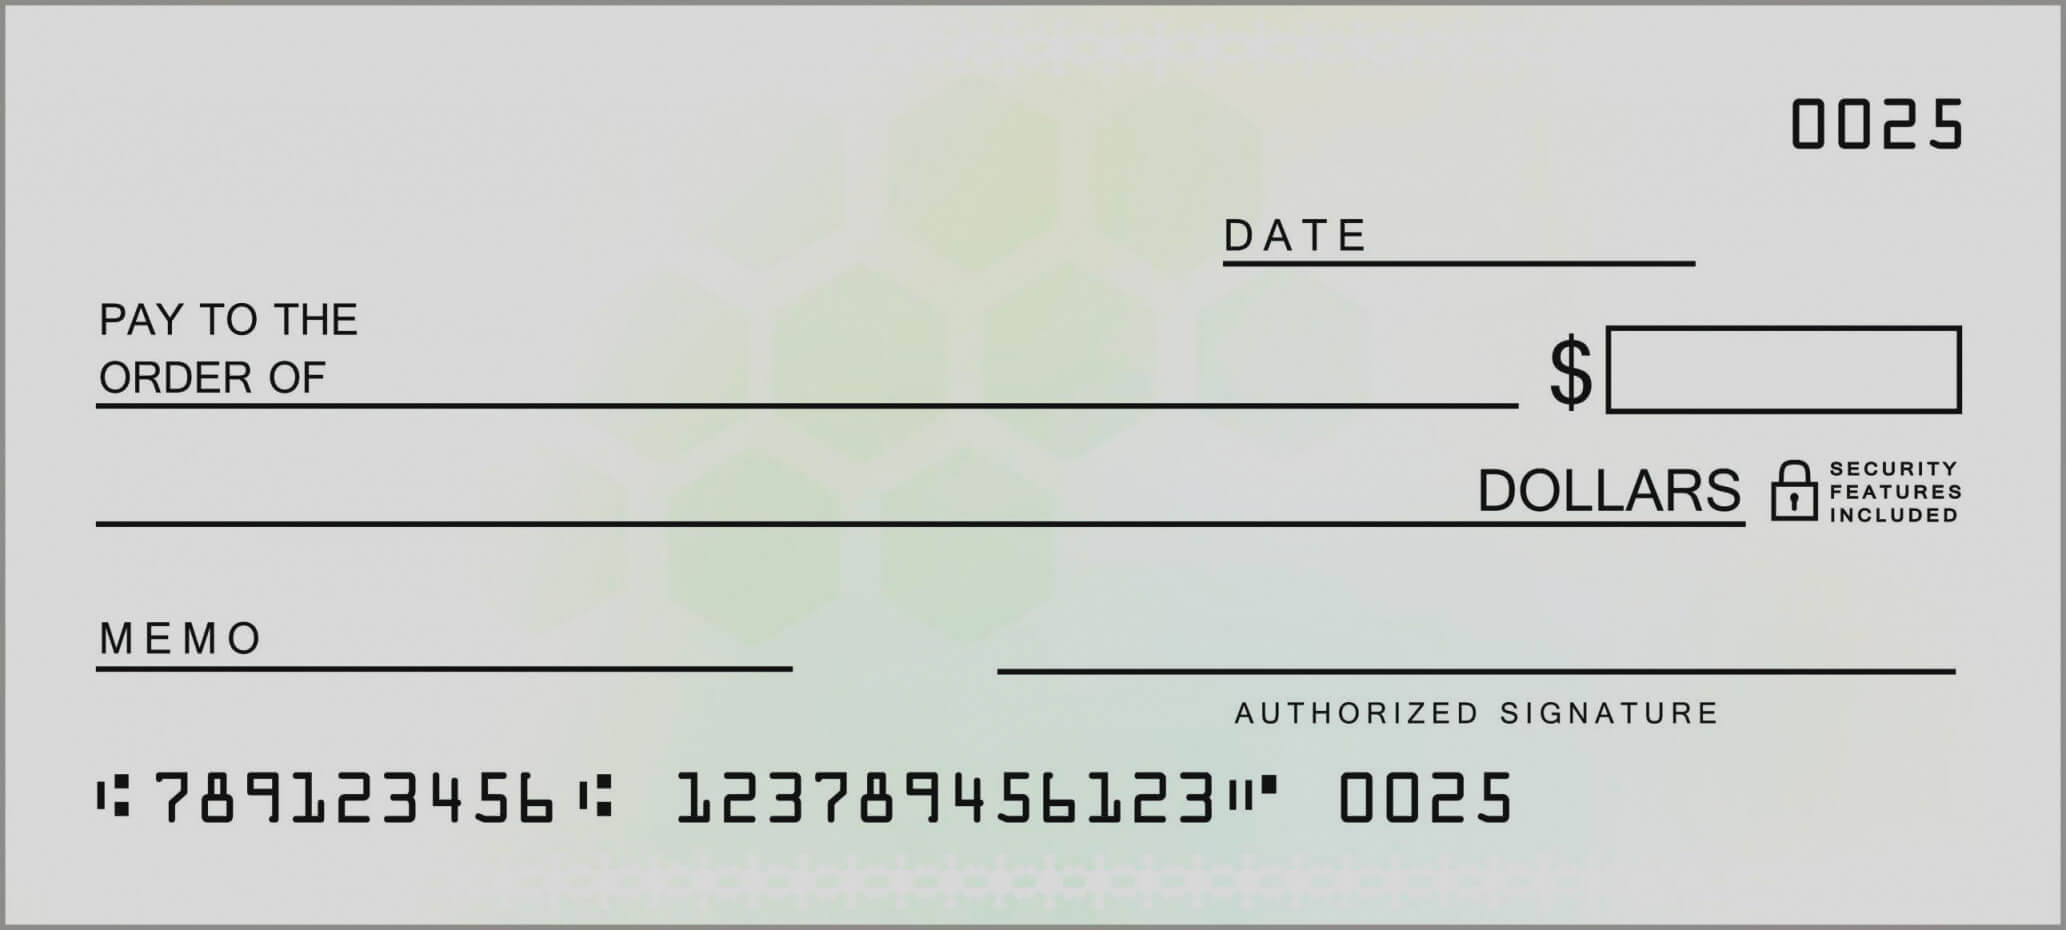 021 Fake Blank Check Template Cheque Free Awesome Payroll Regarding Blank Cheque Template Download Free